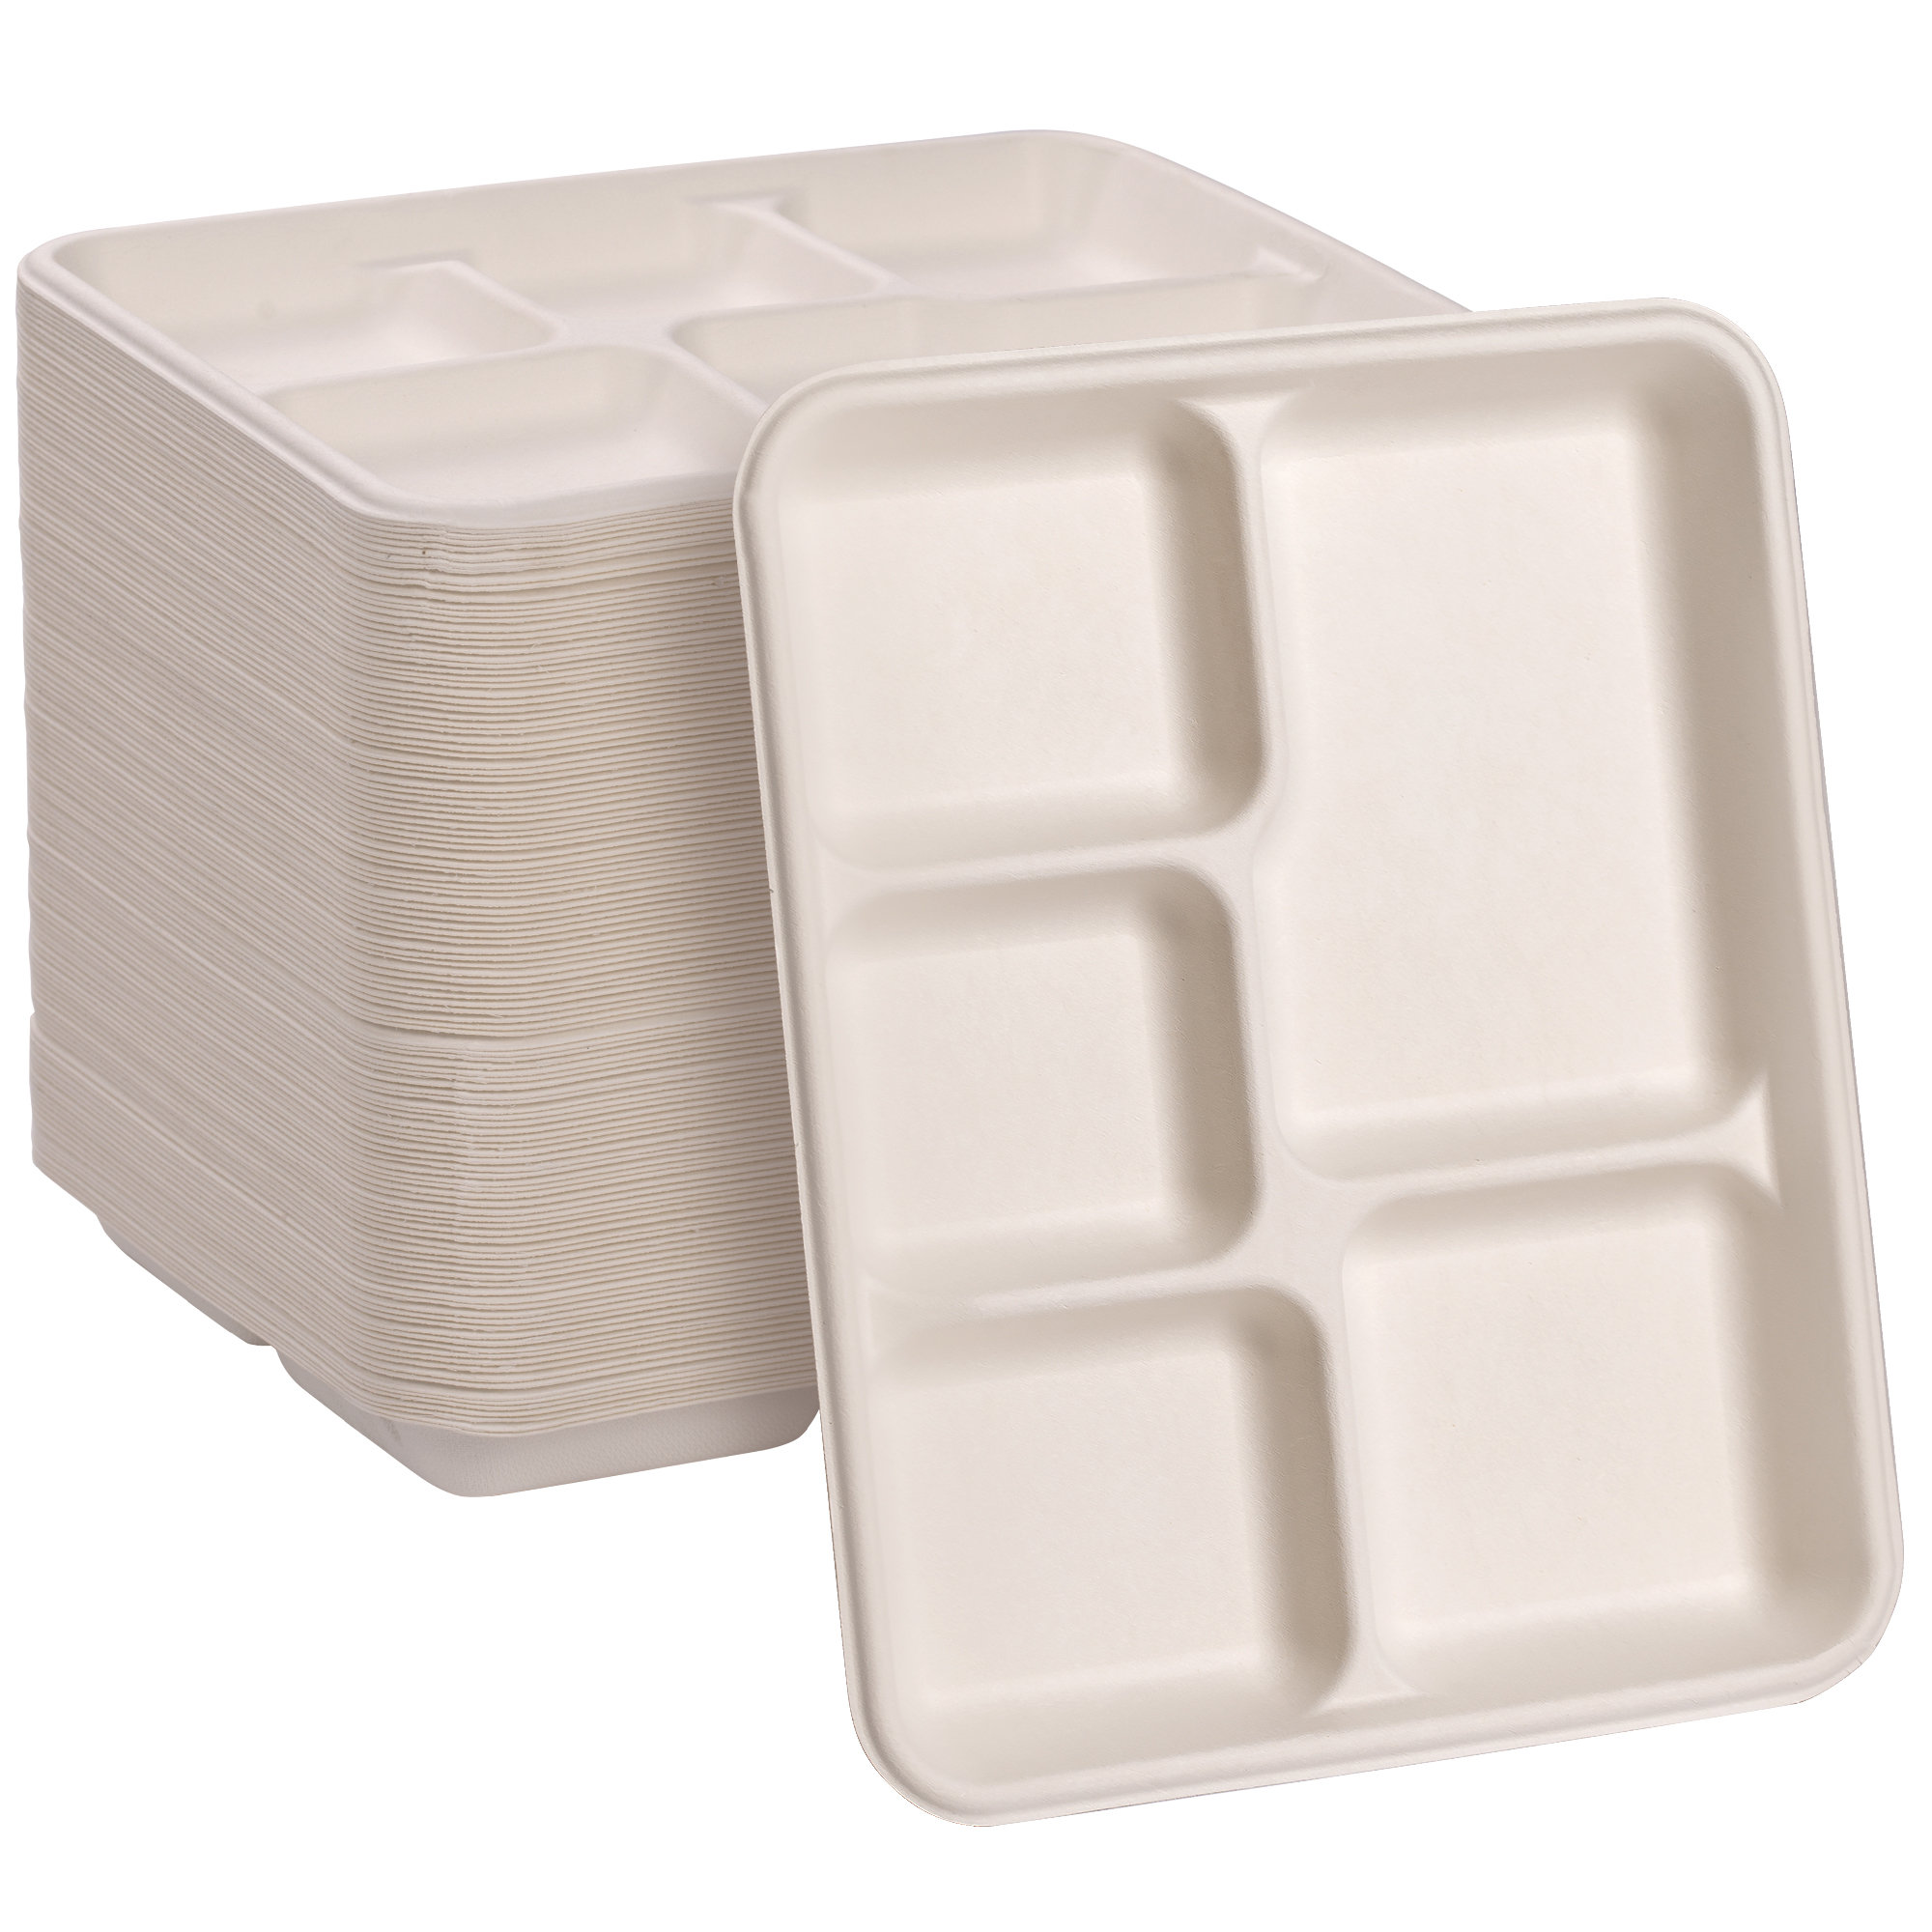  Comfy Package, 100% Compostable 5 Compartment Plates  Eco-Friendly Disposable Sugarcane 10 inch Paper Trays : Health & Household